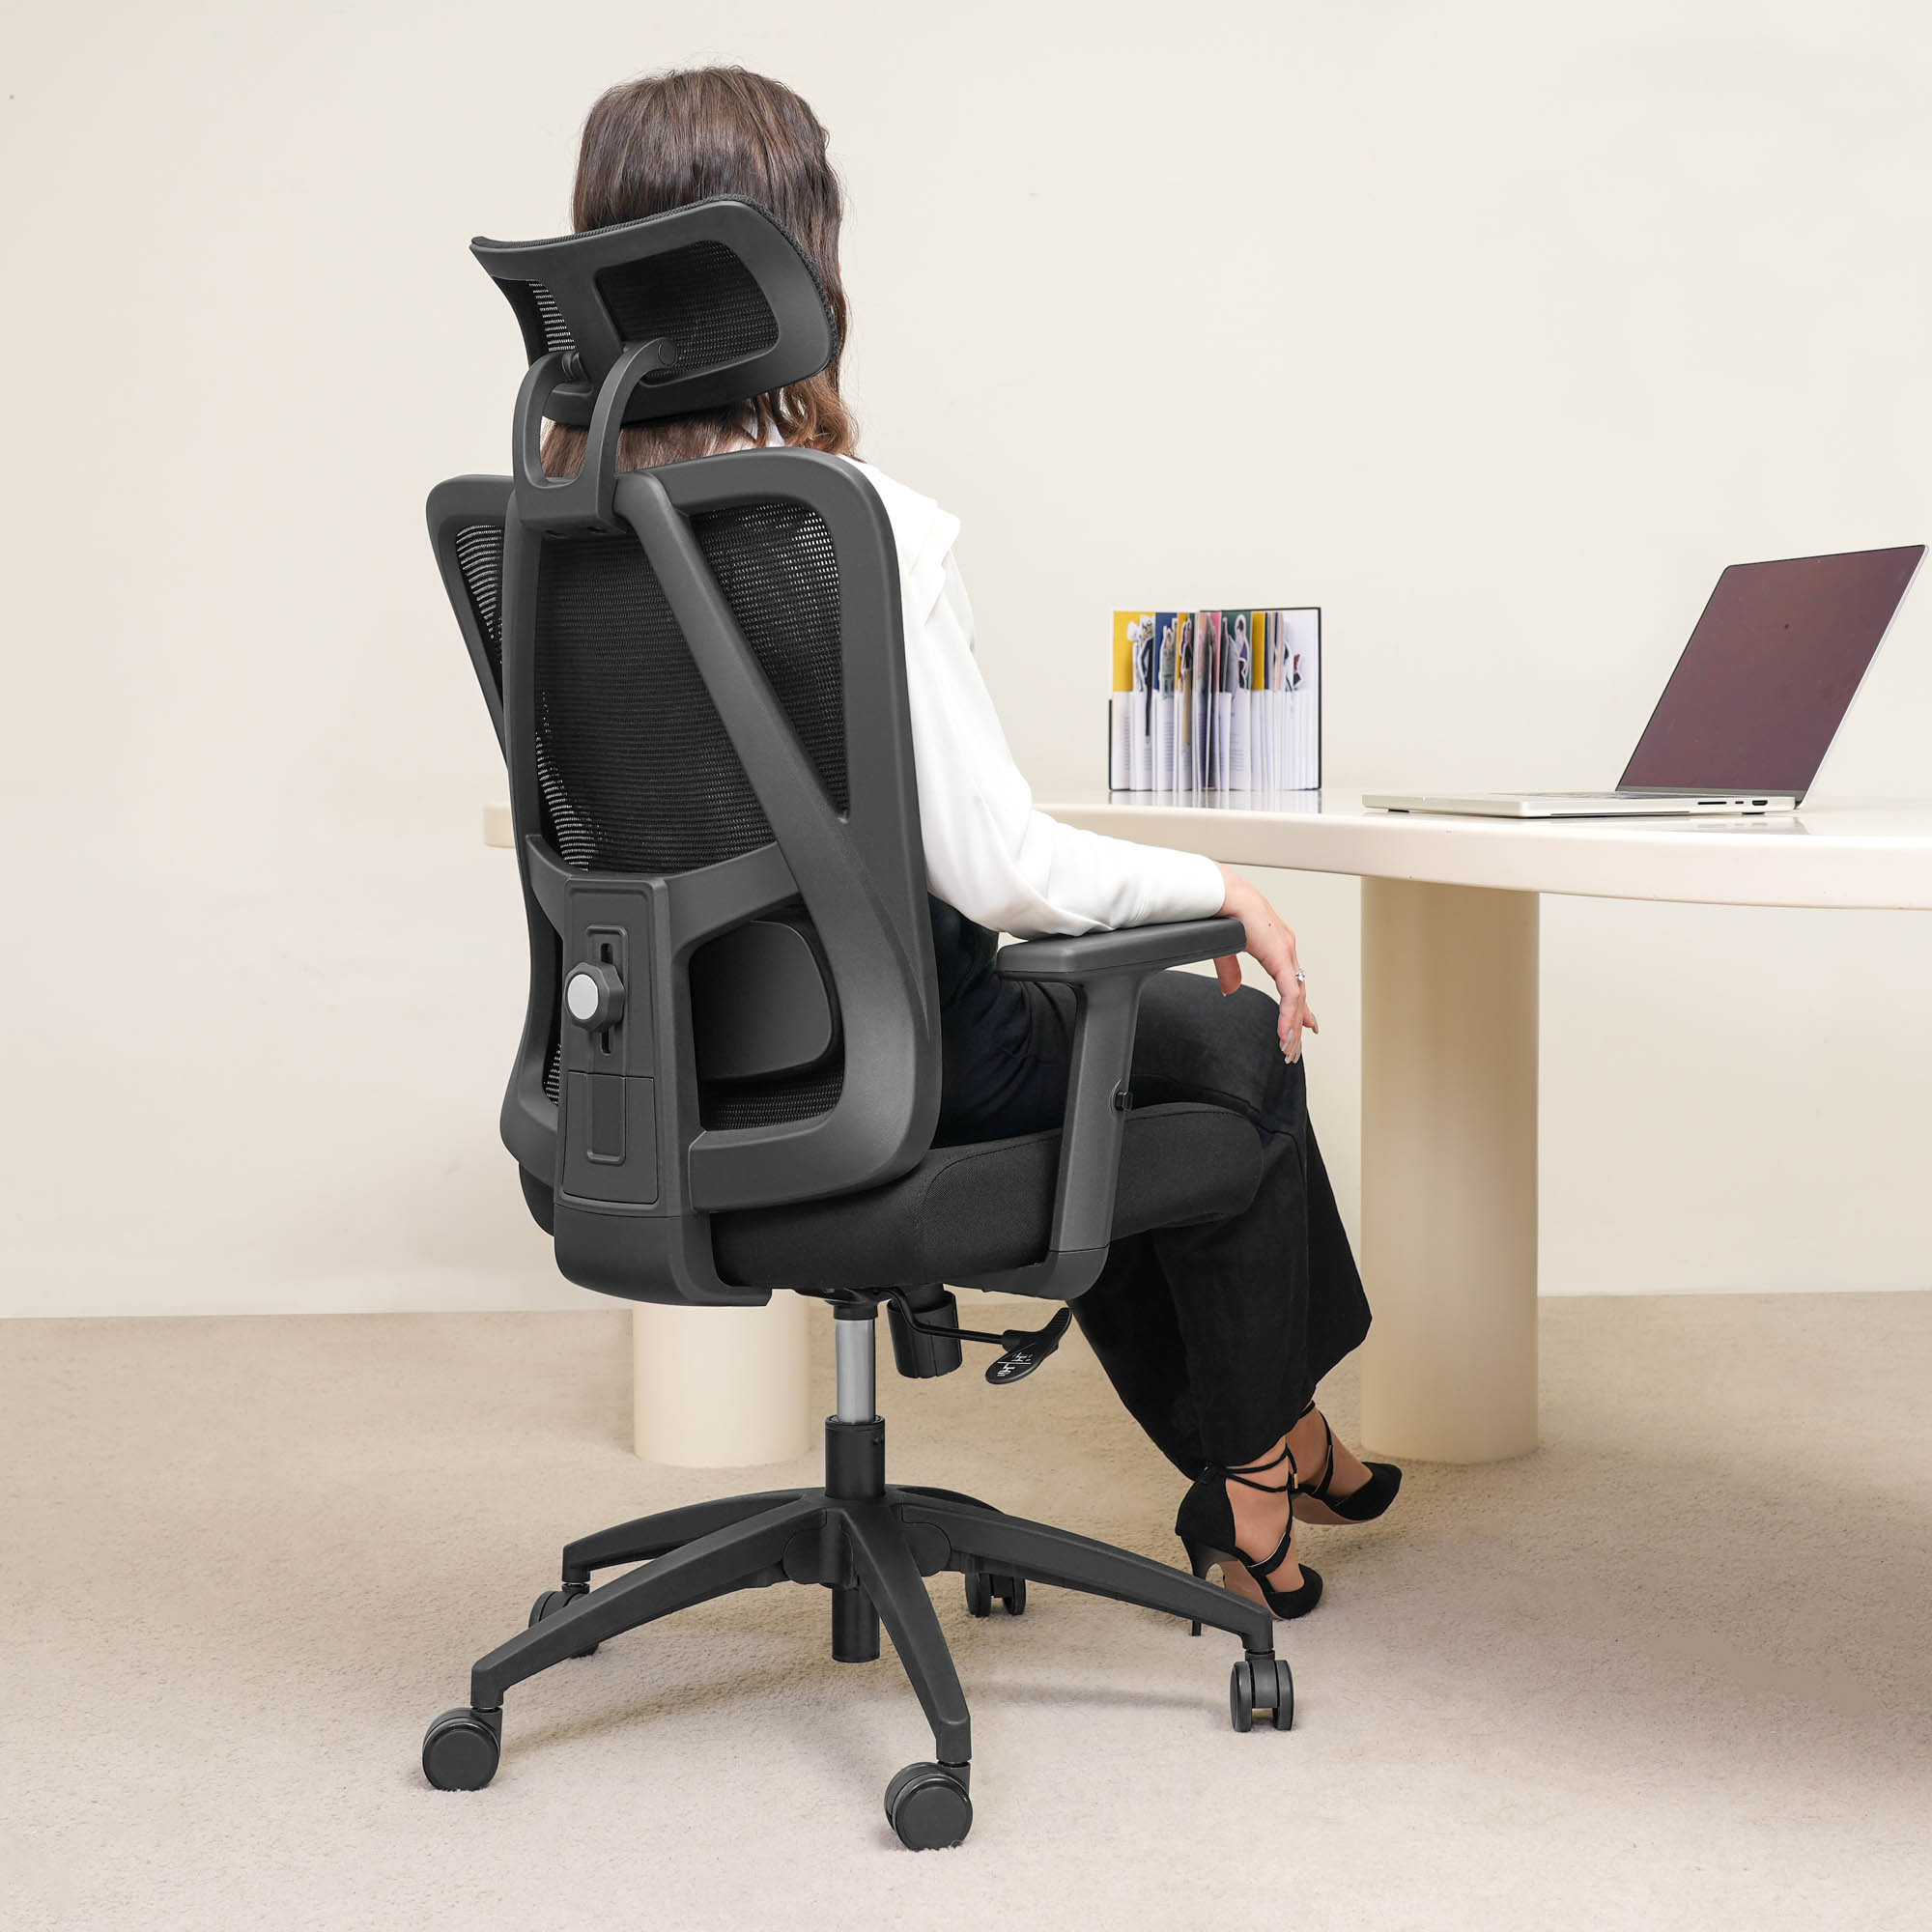 Back and Spine Support Cushion - Adjustable Ergonomic Support